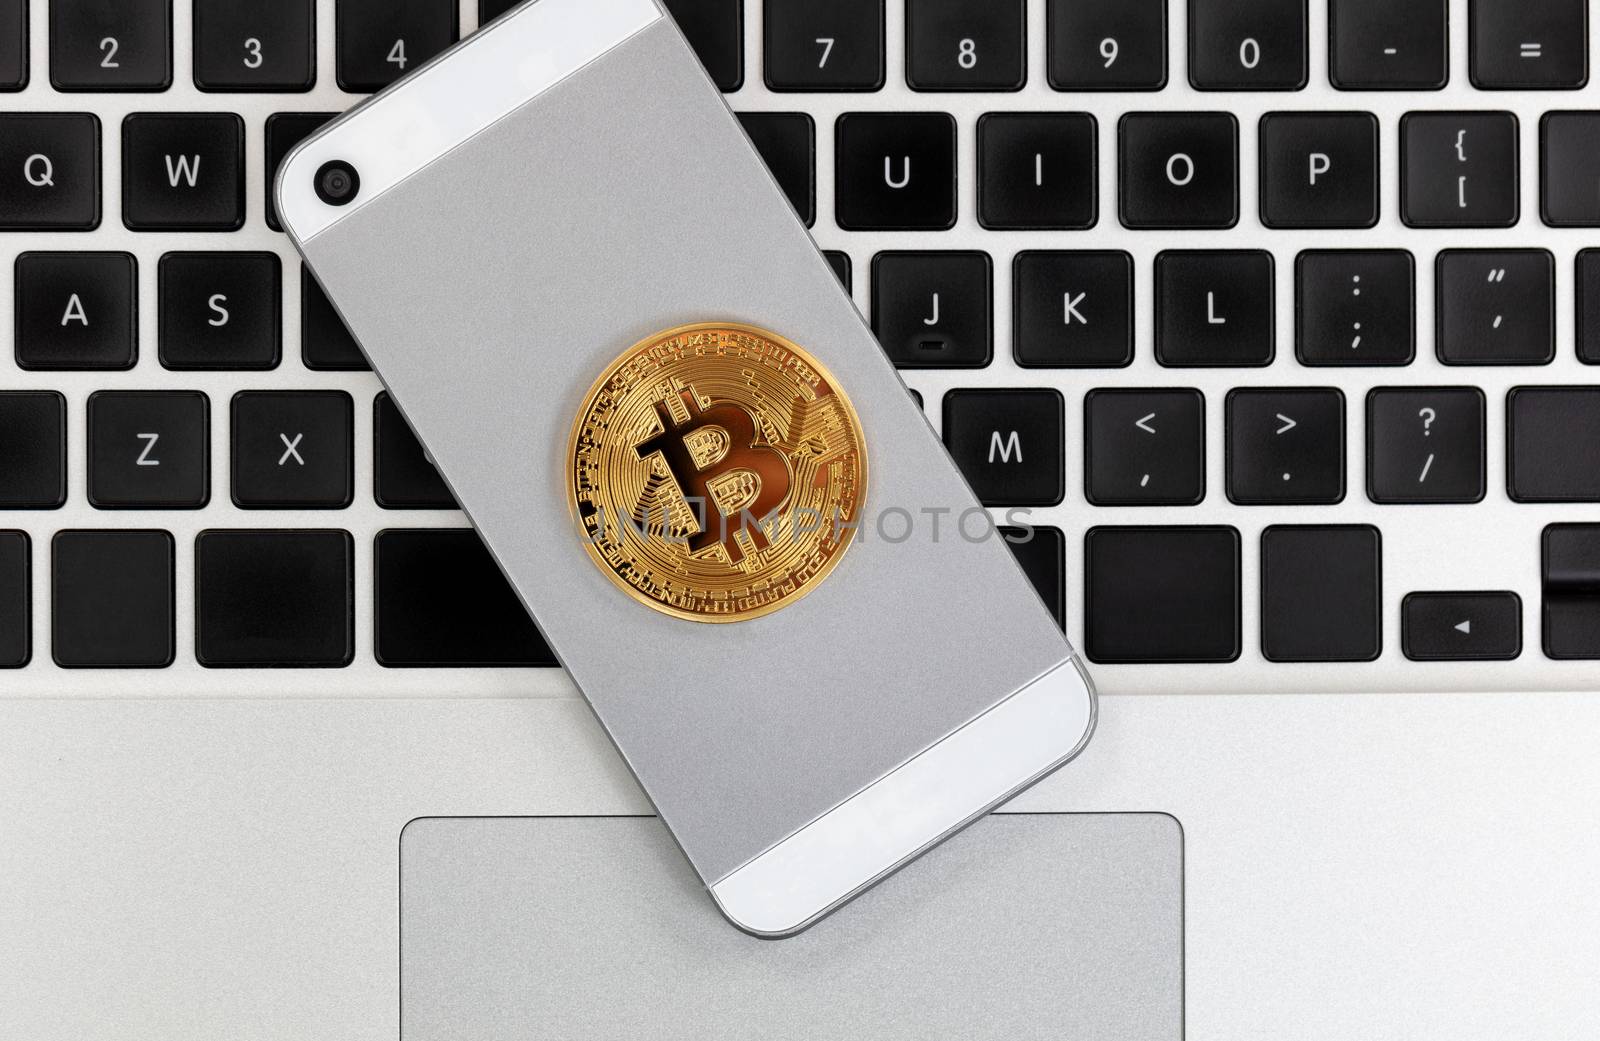 Bitcoin currency on smart phone with computer keyboard in background.  Crypto investment via wireless mobile technology concept